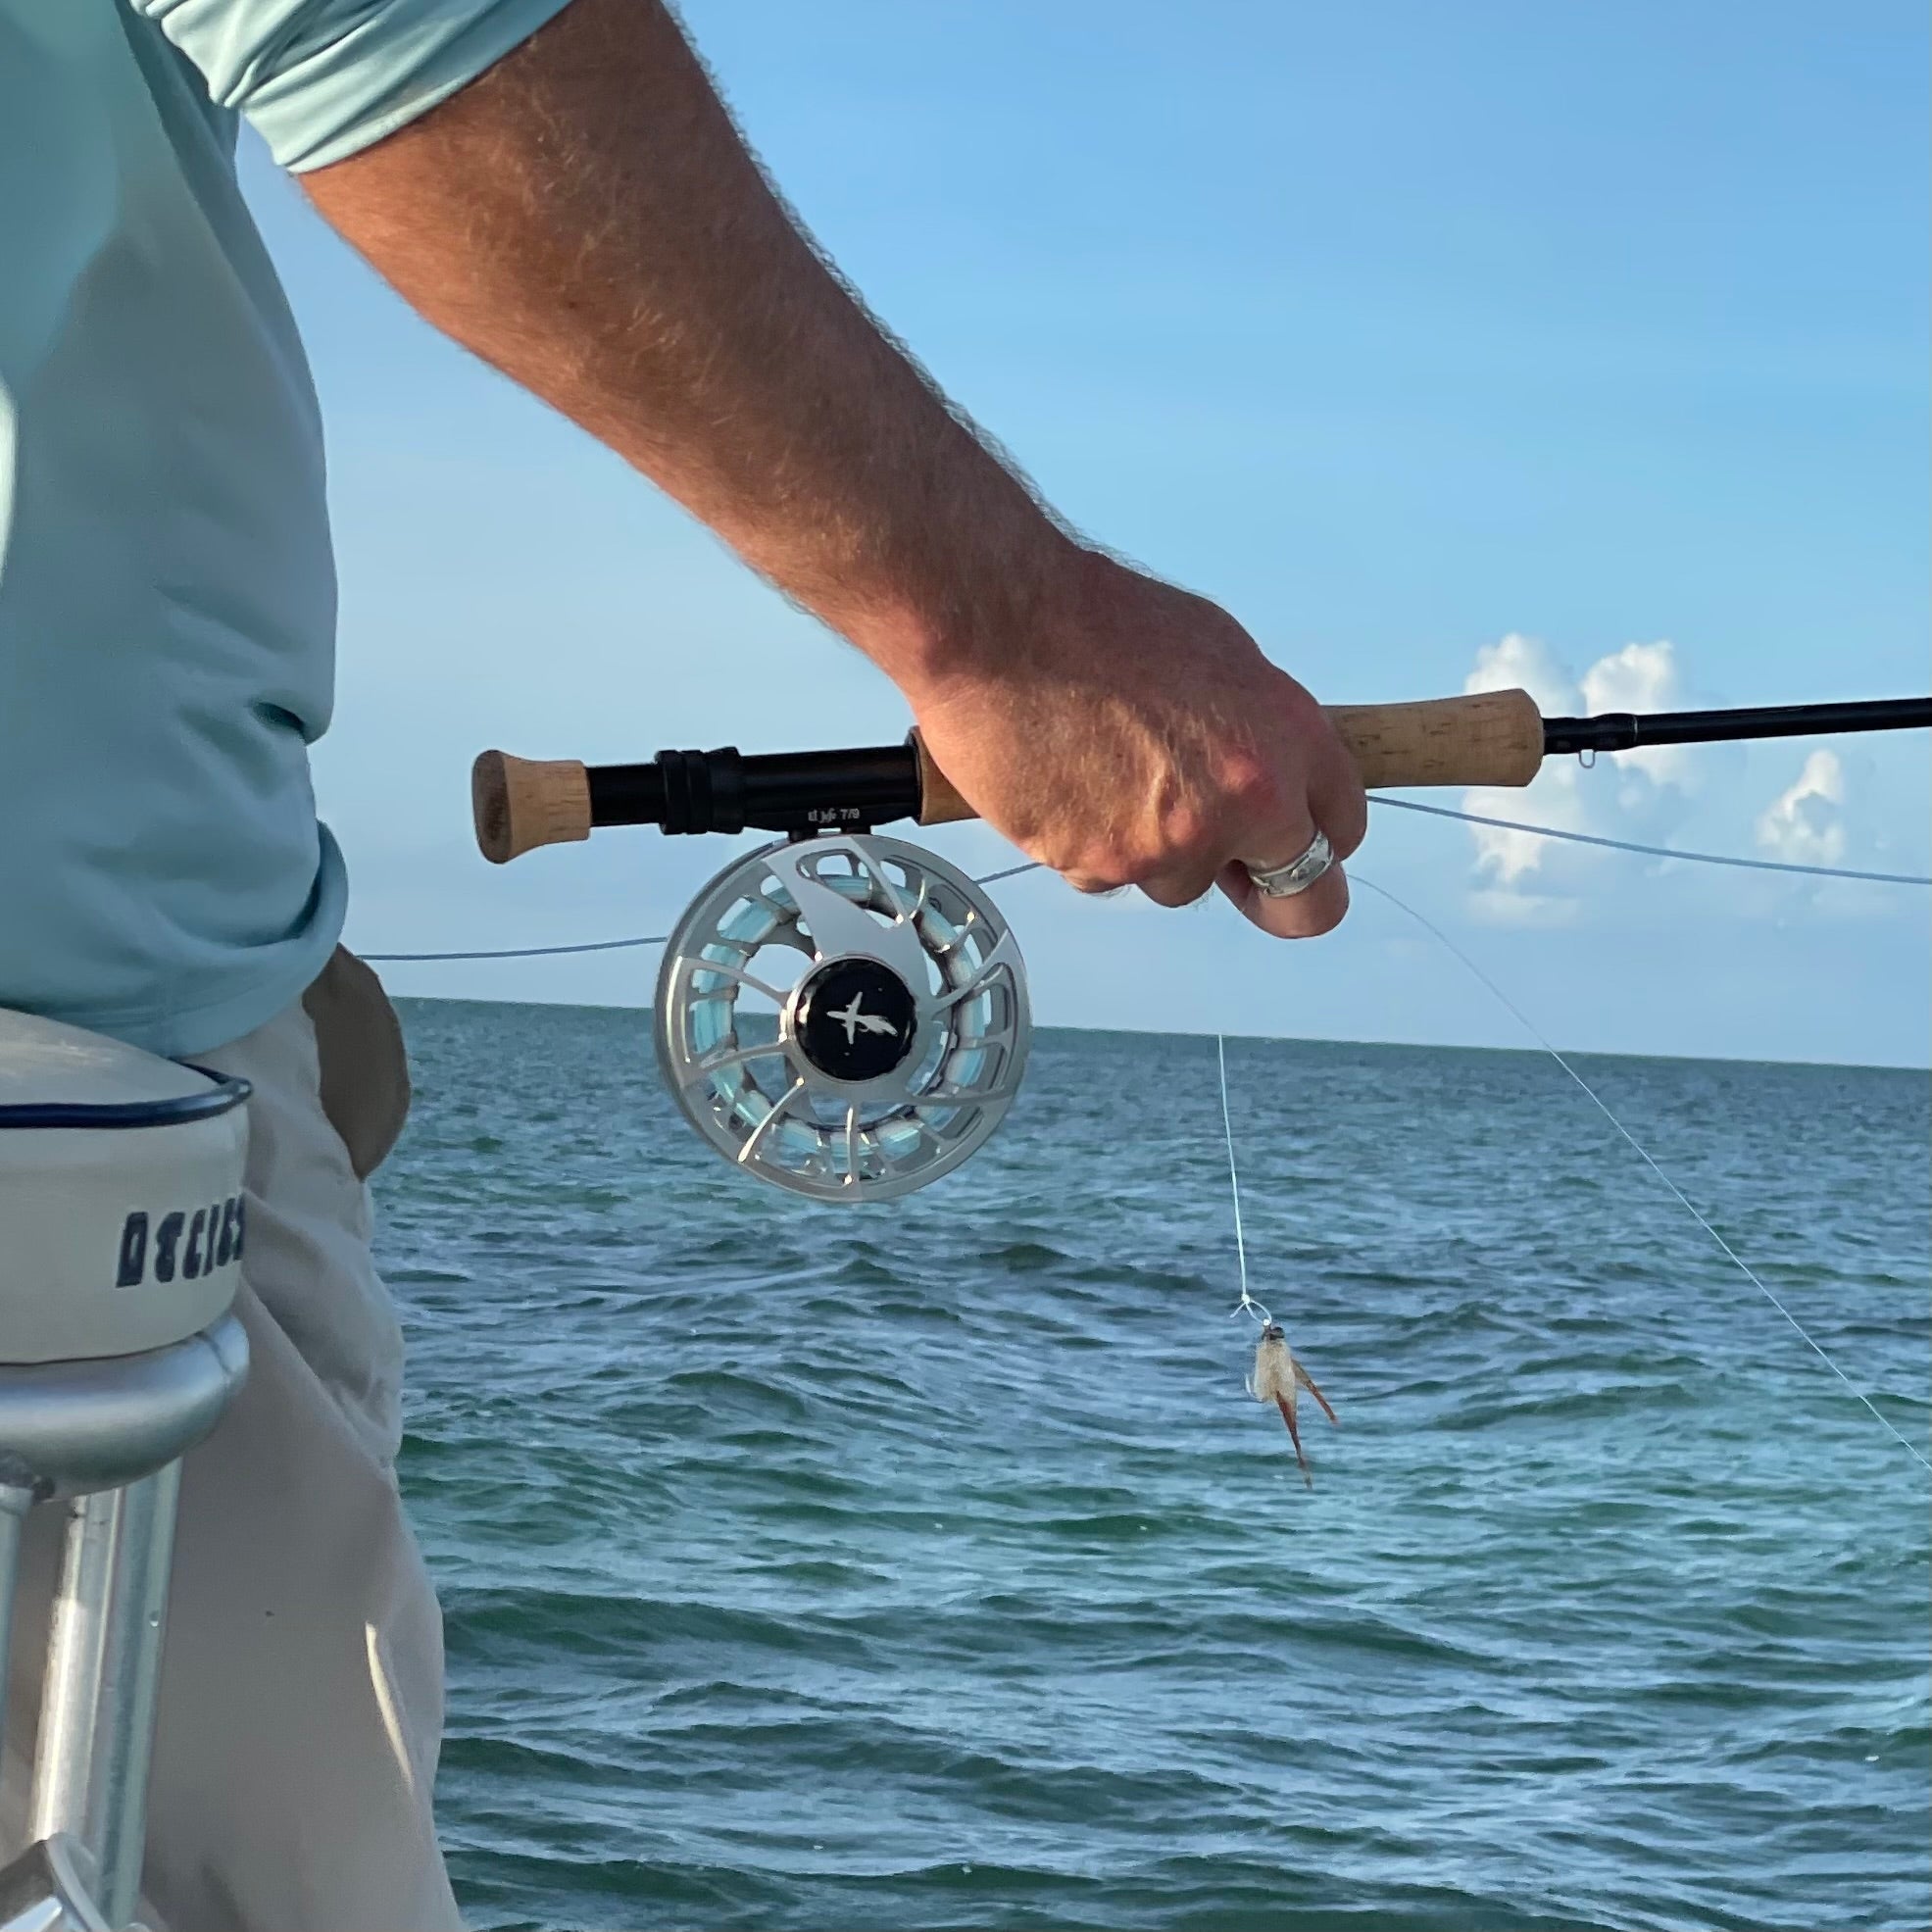 El Jefe Saltwater Fly Fishing Combo Package | 906-8 | 9' Six Section 8 Weight Fly Rod And Reel Outfit